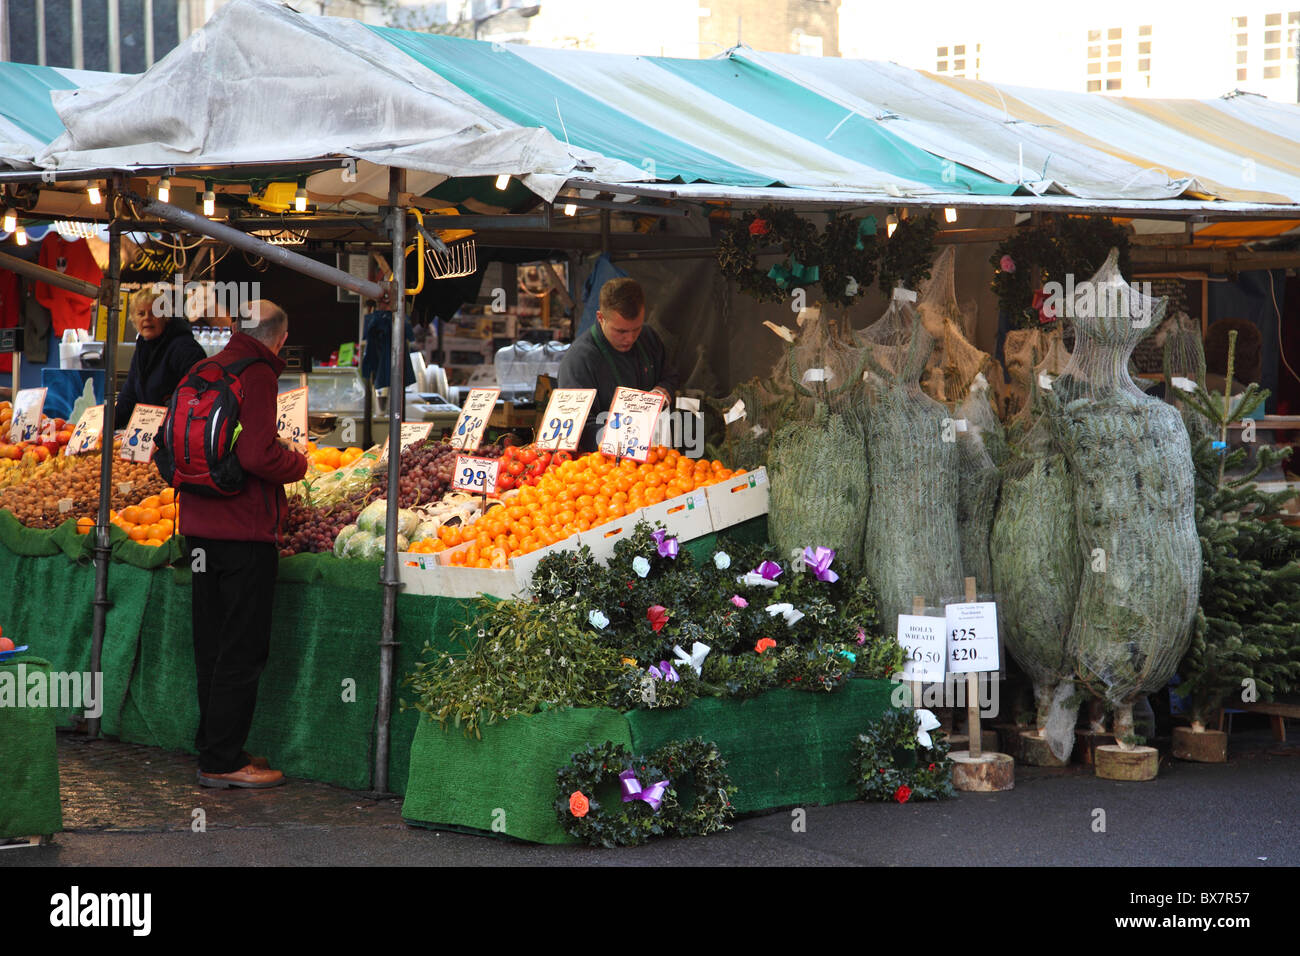 A stall selling fruit, vegetables and Christmas trees on a market in Cambridge, England, U.K. Stock Photo